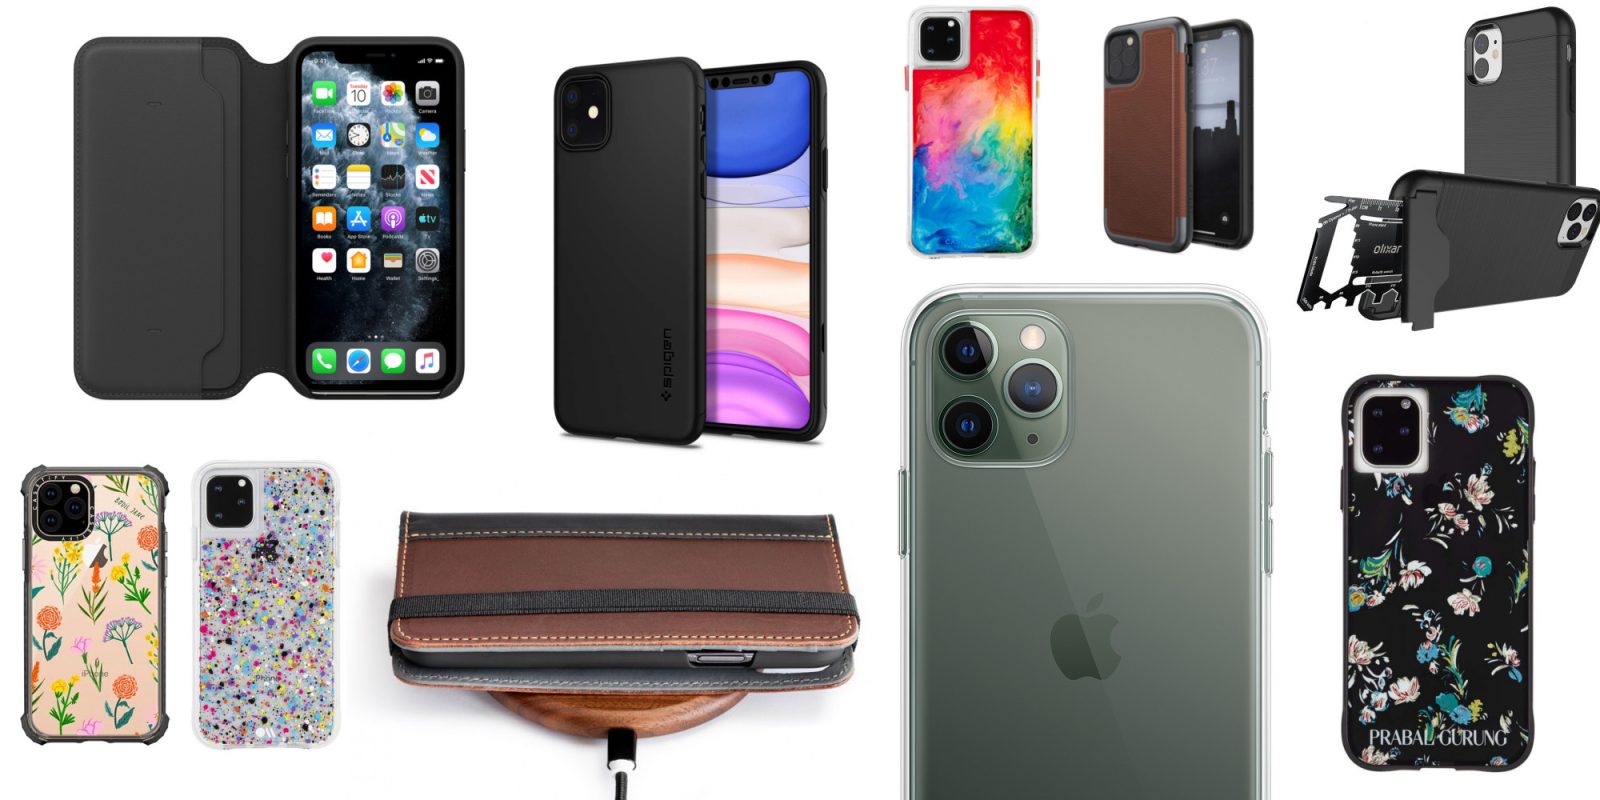 Best iPhone 11 cases, iPhone 11 Pro and Max